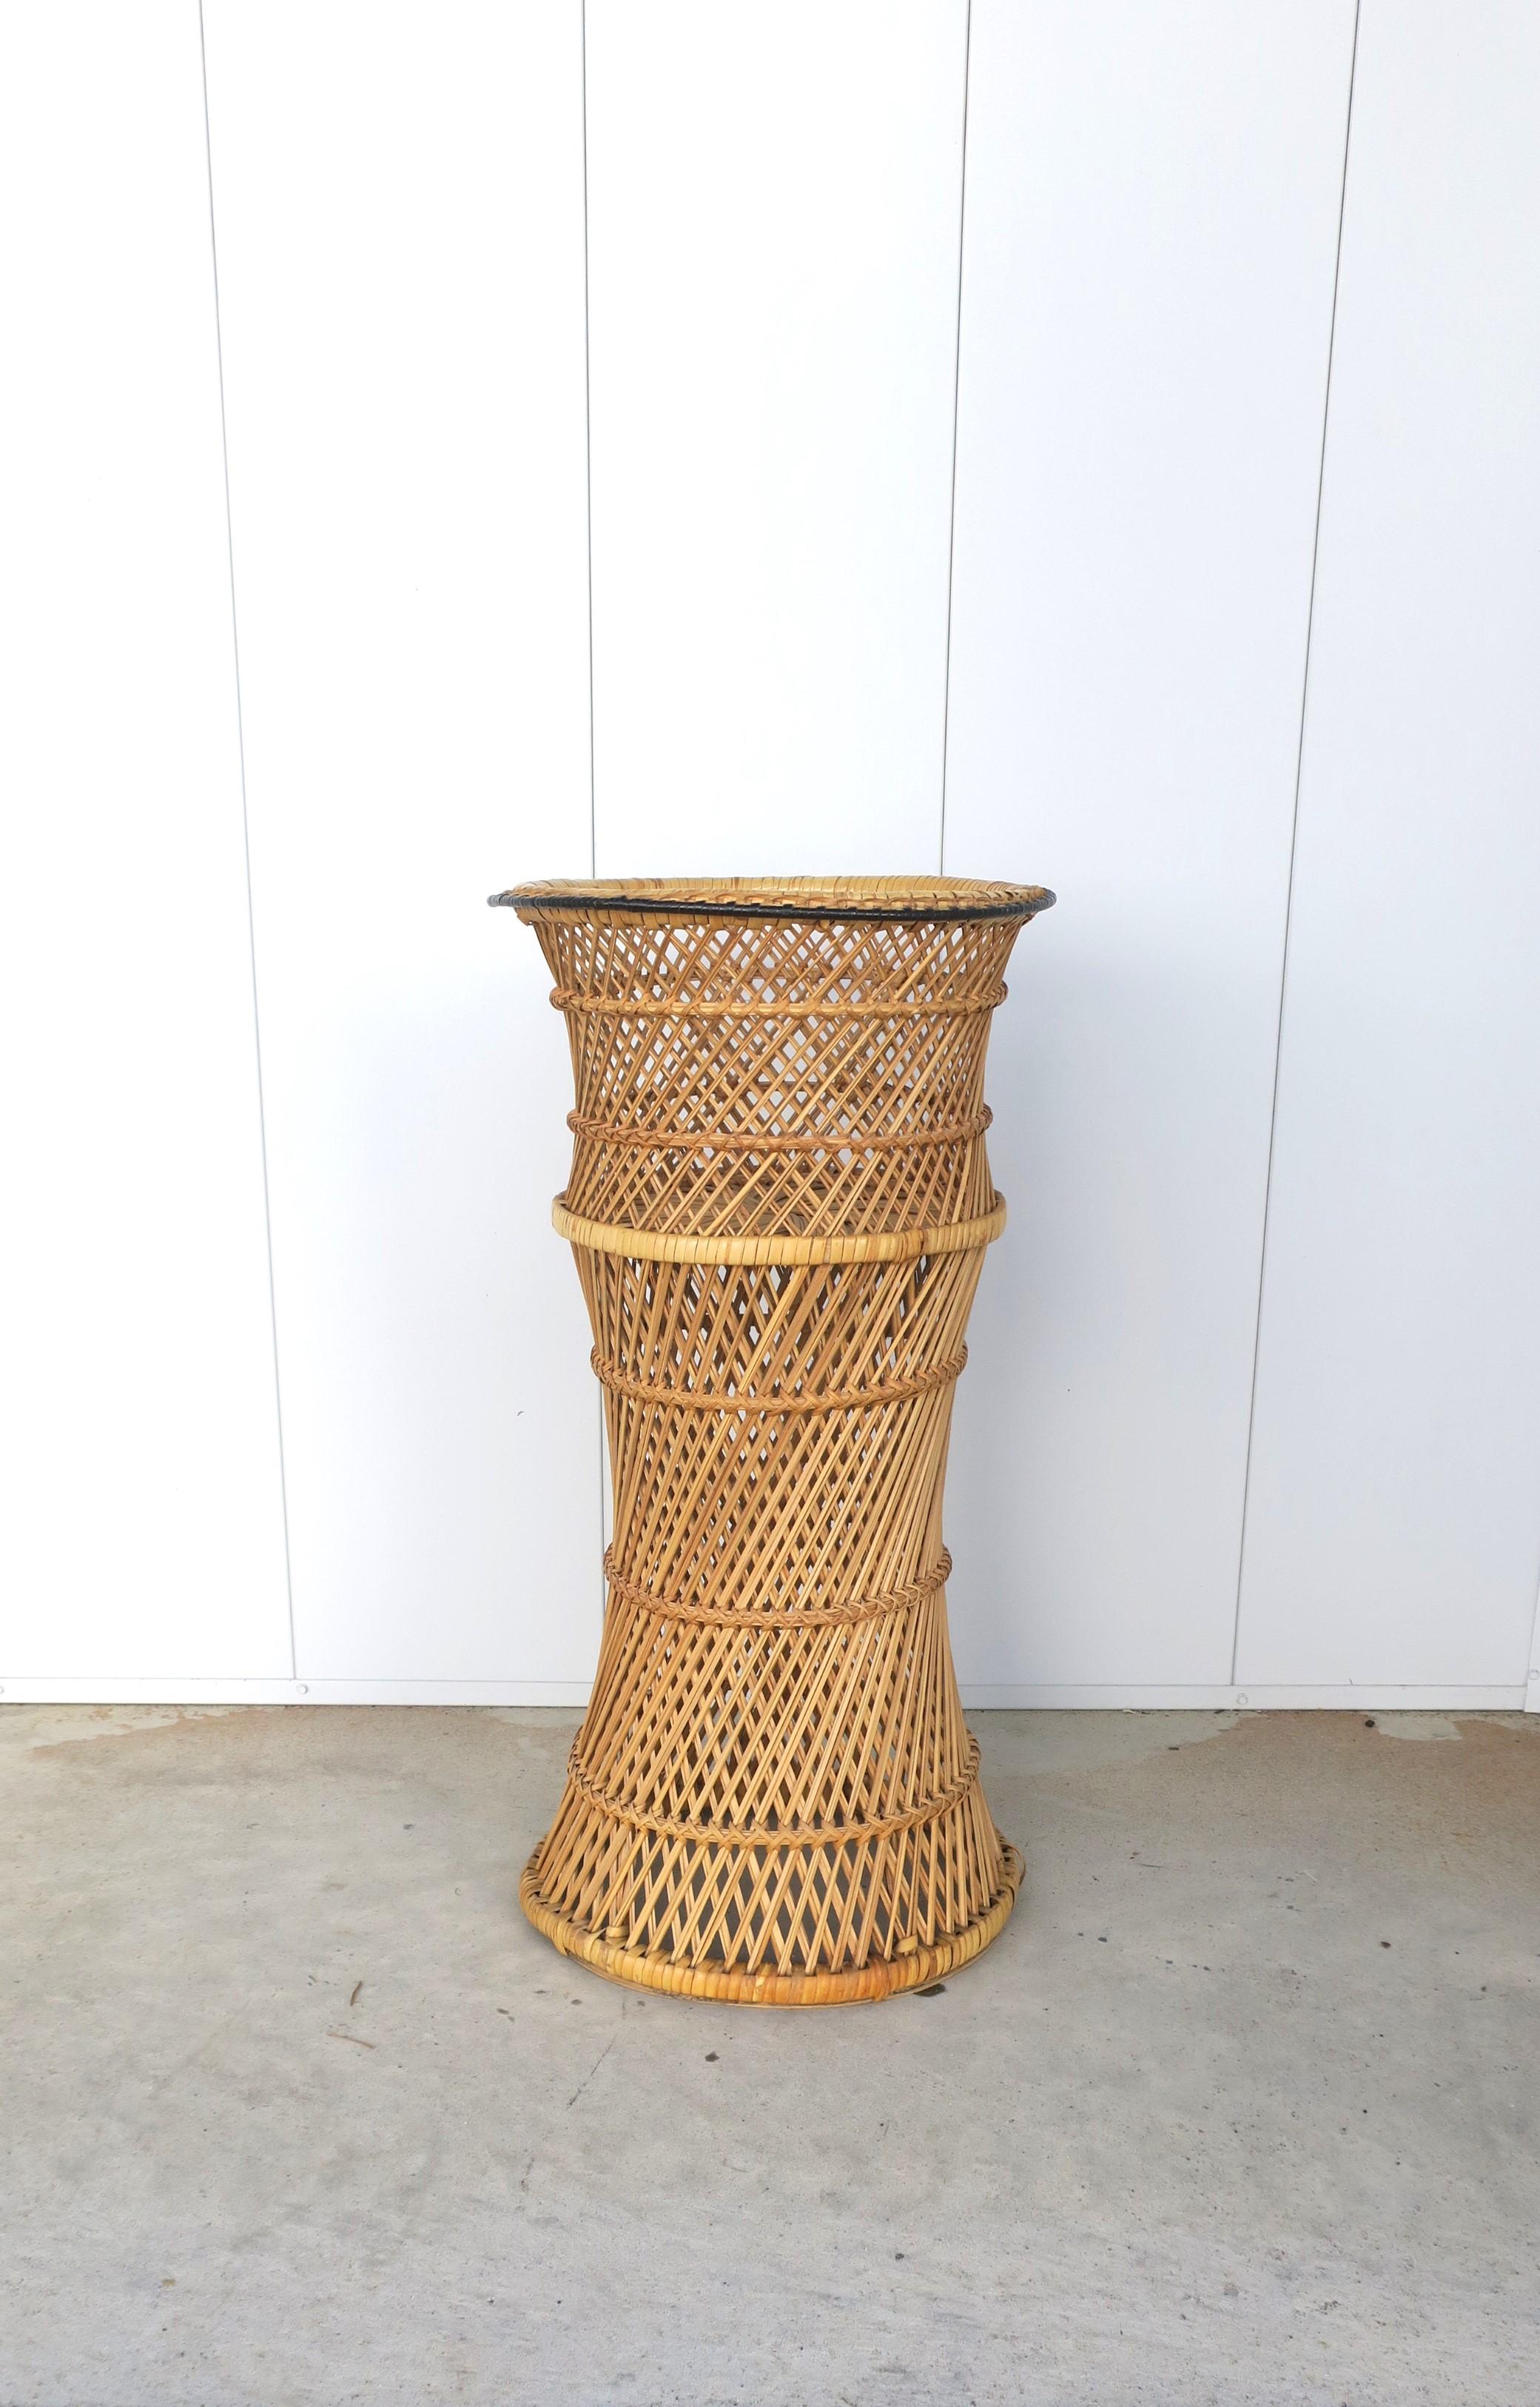 A tall wicker flower or plant cachepot jardiniere holder stand, circa mid to late-20th century. A great piece to elevate a flower or plant, indoors or outside covered patio. Piece is in the style of Emmanuelle Peacock. Dimensions include the